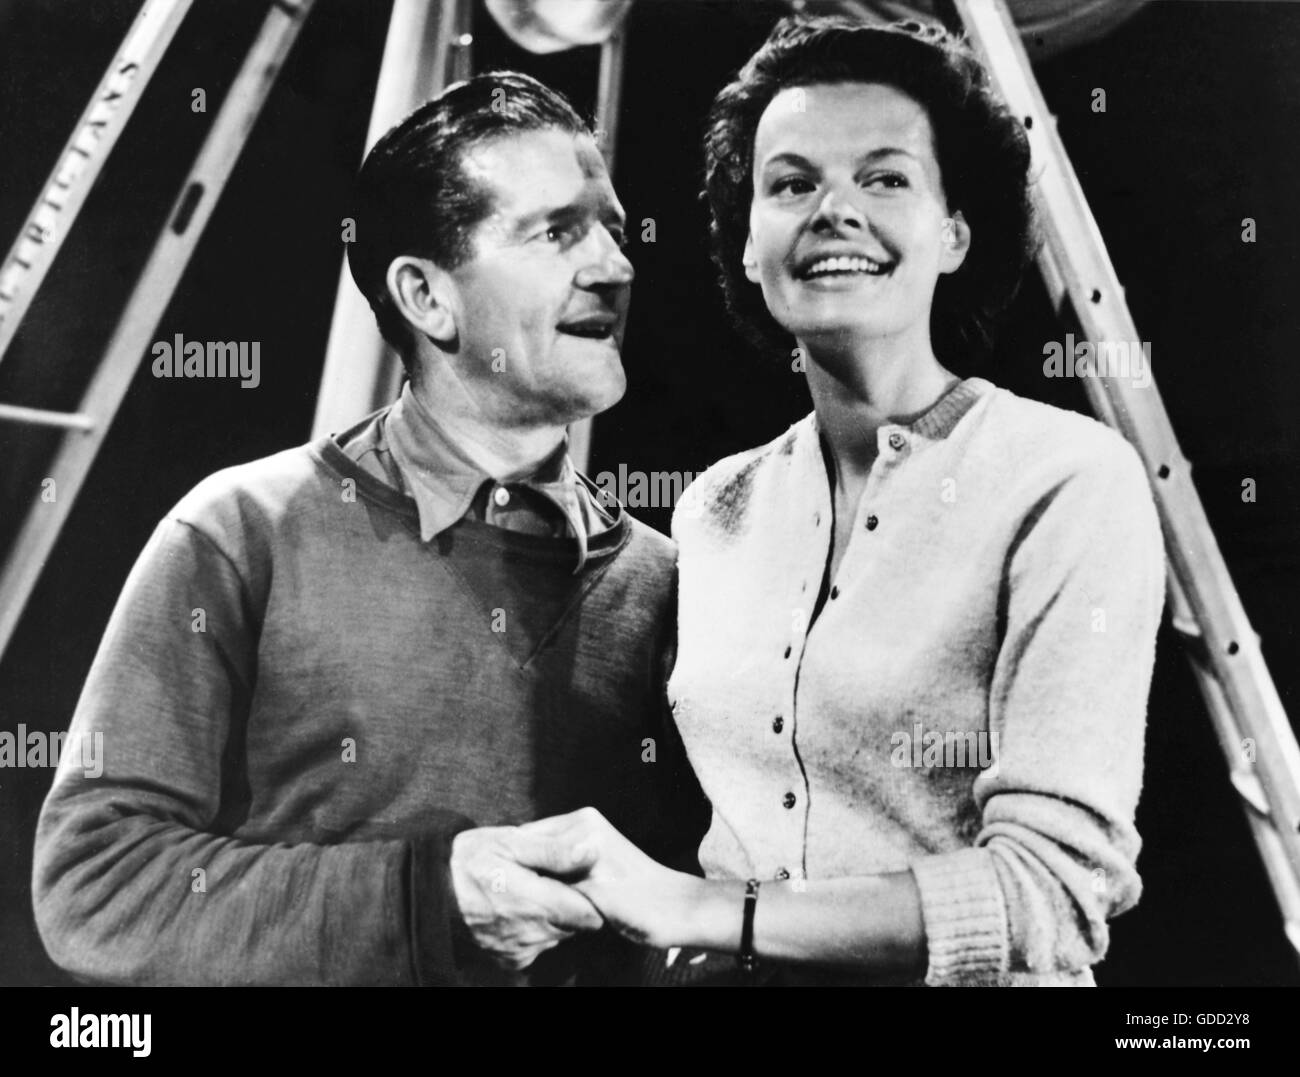 Hielscher, Margot, * 29.9.1919, German actress, half length, with Ted Ray, during stage performance, 'The Ted Ray Show', Lime Grove Studio, London, 19.6.1955, Stock Photo